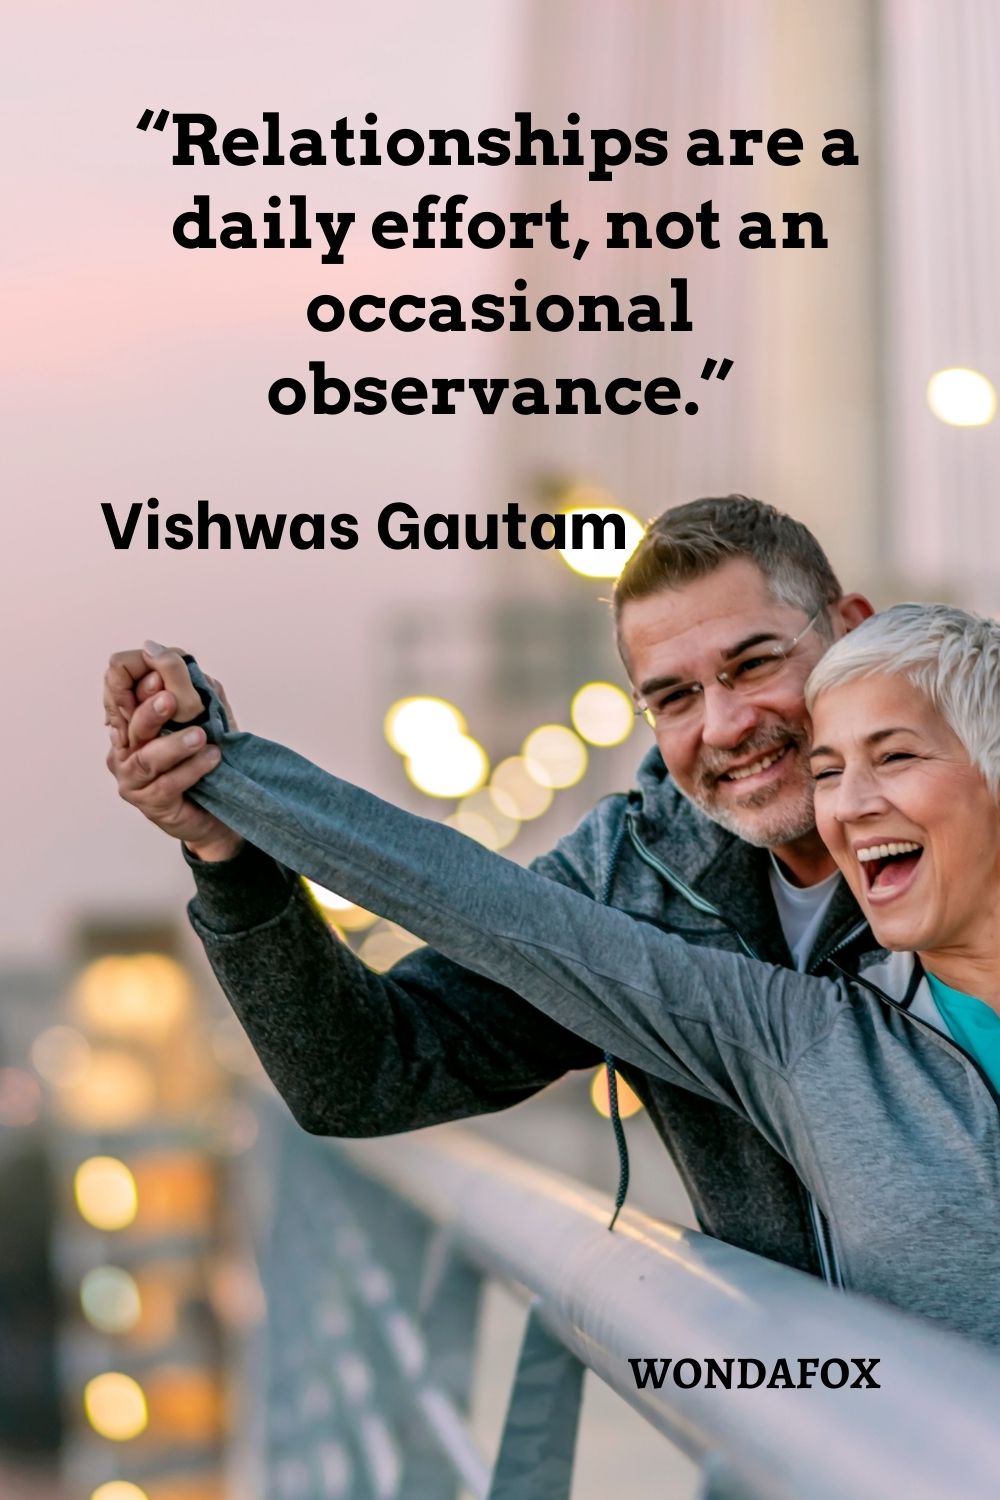  “Relationships are a daily effort, not an occasional observance.”
Vishwas Gautam